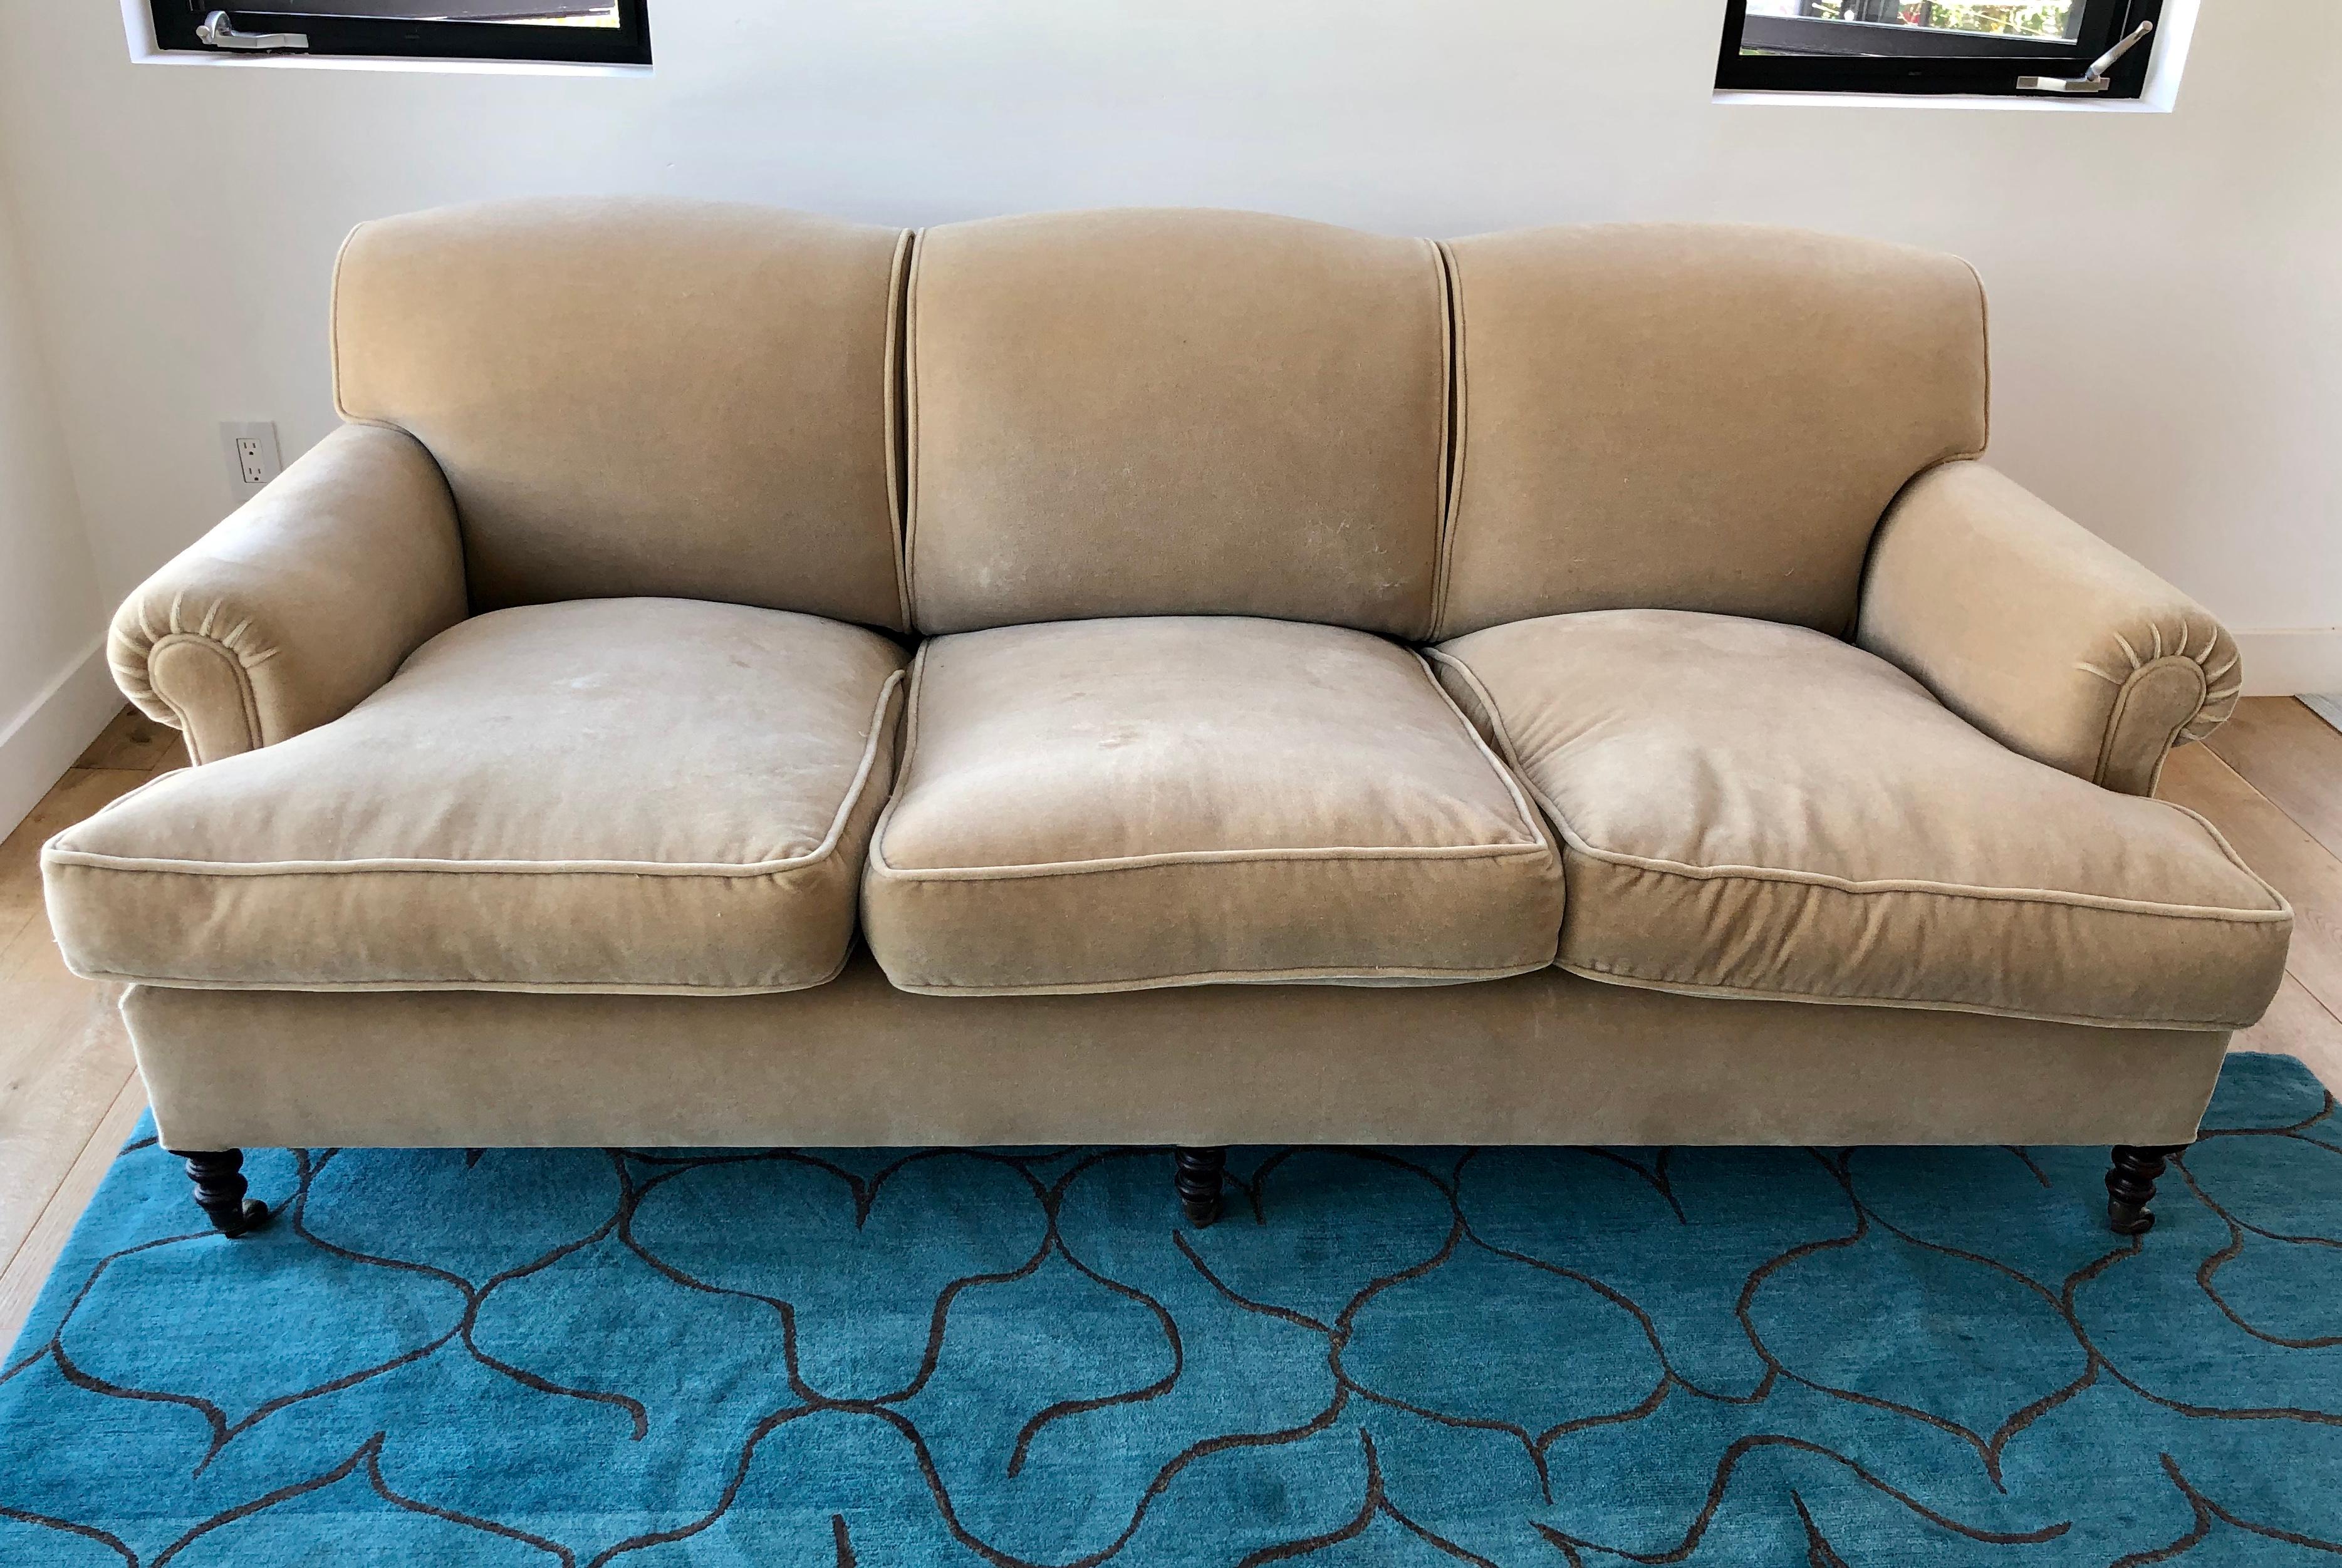 Beautiful elegant sofa by George Smith England in light beige color, manufactured in 2010 retains label and brass tag nice clean condition, no stains or fade. Priced to sell.